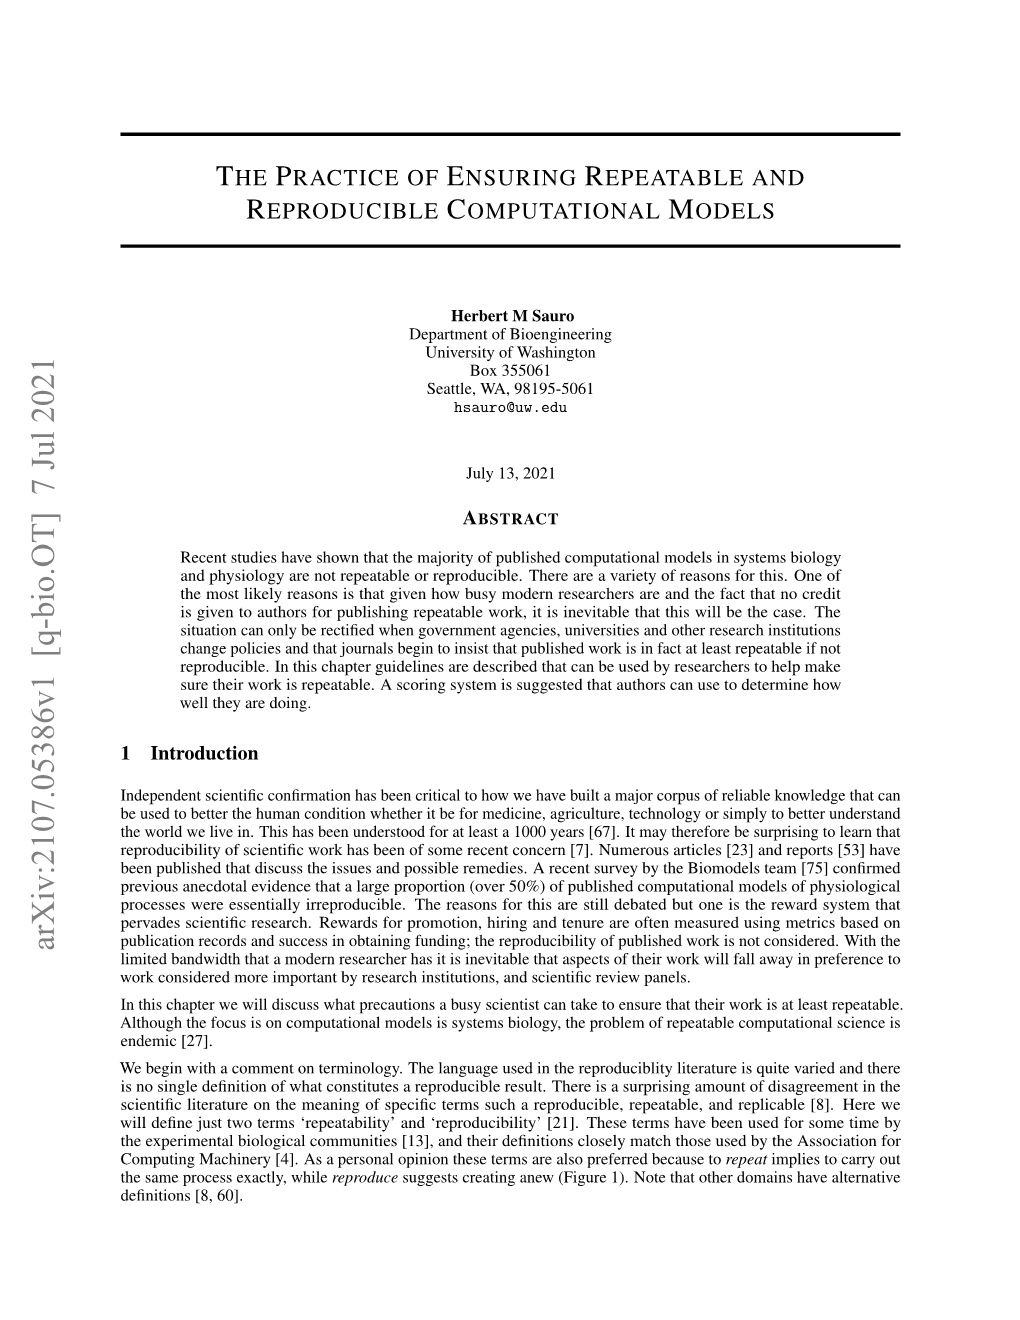 The Practice of Ensuring Repeatable and Reproducible Computational